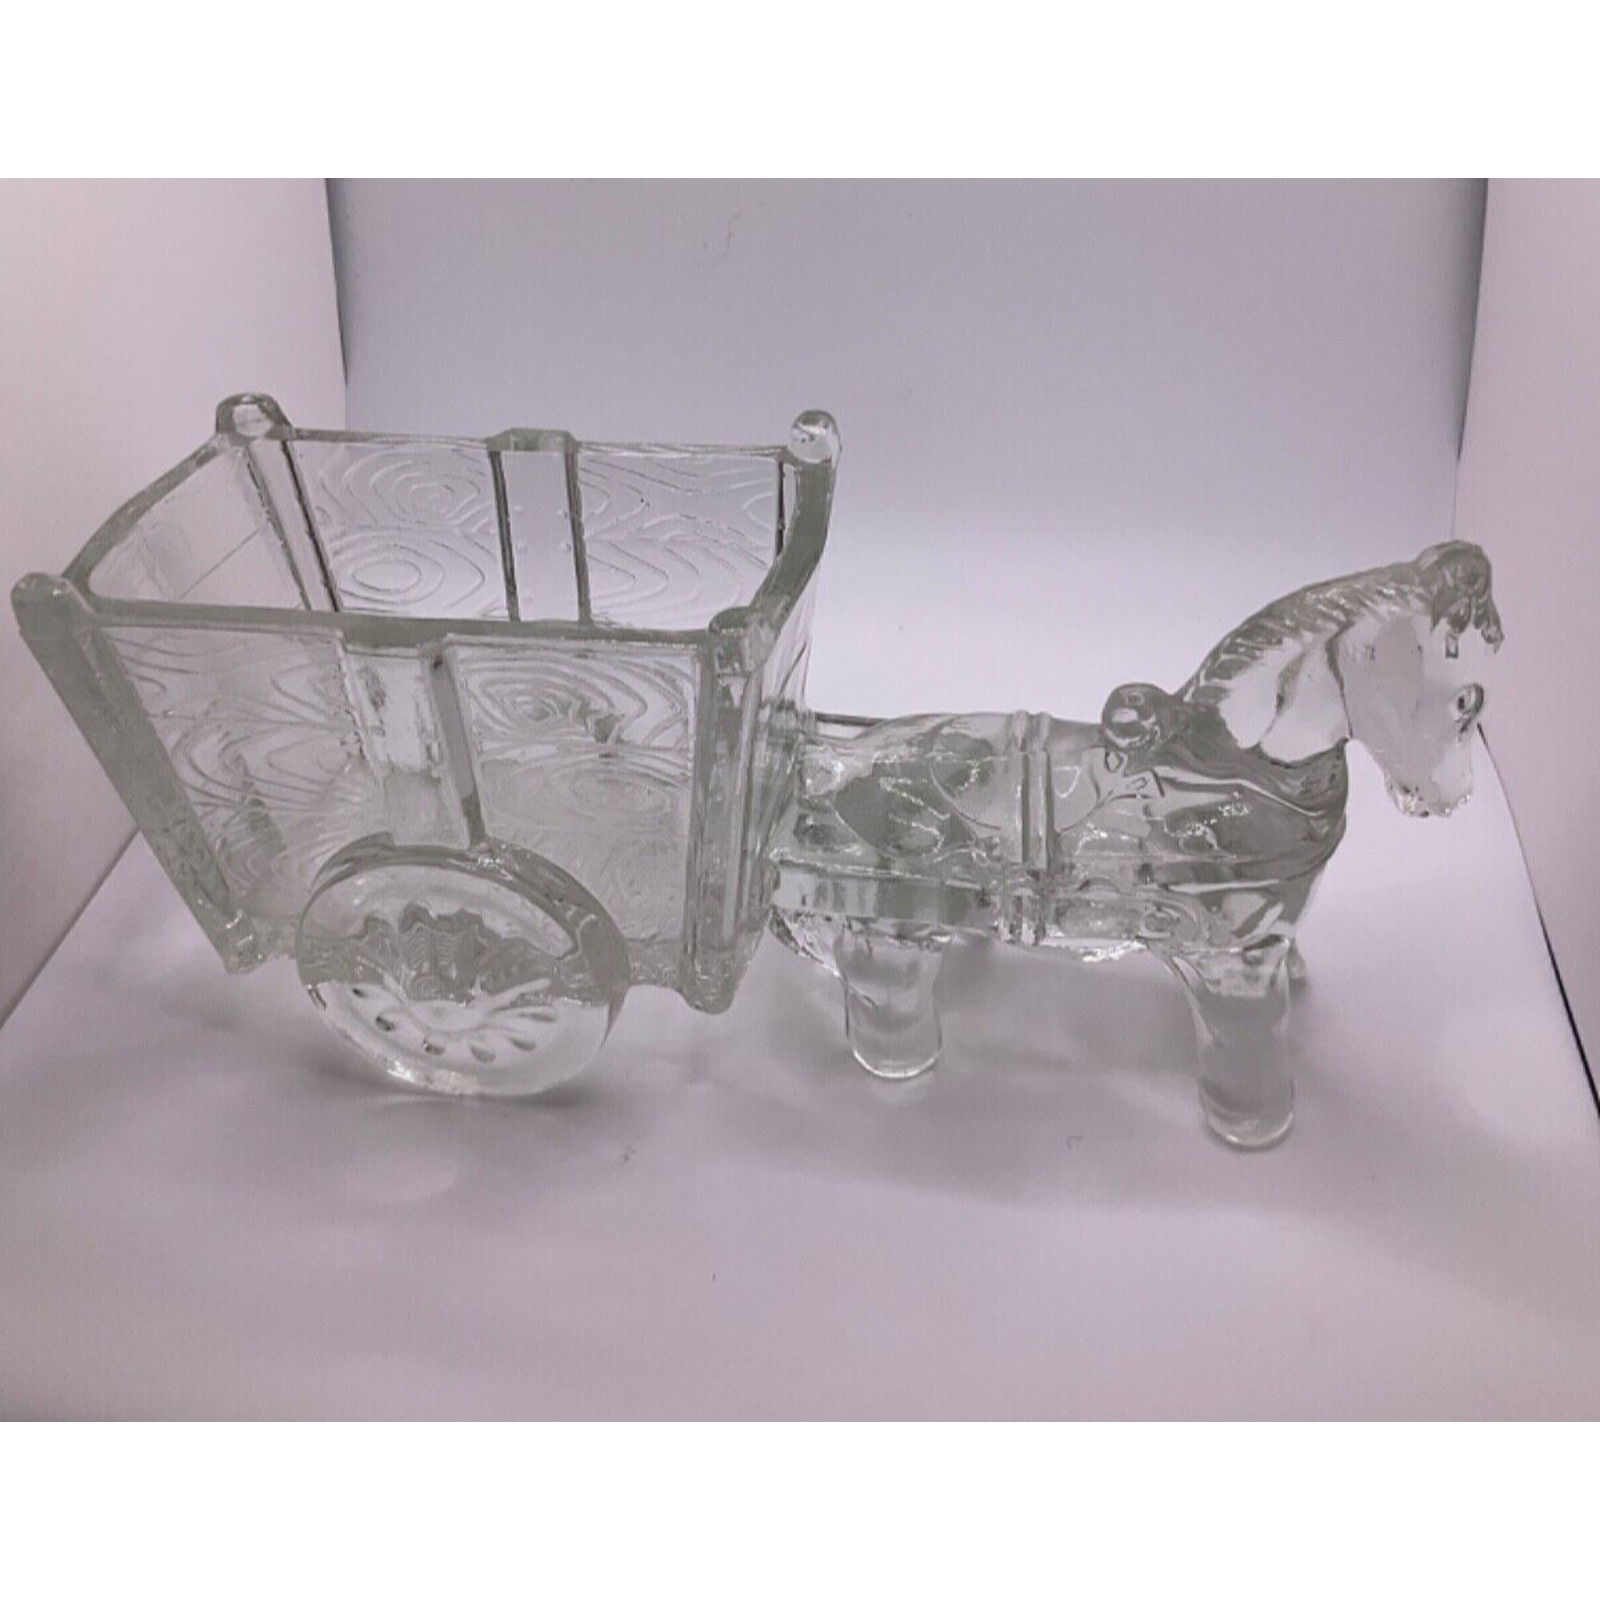 Vintage Pressed Glass Candy Dish - Horse Pulling Wagon Design - A Charming Piece